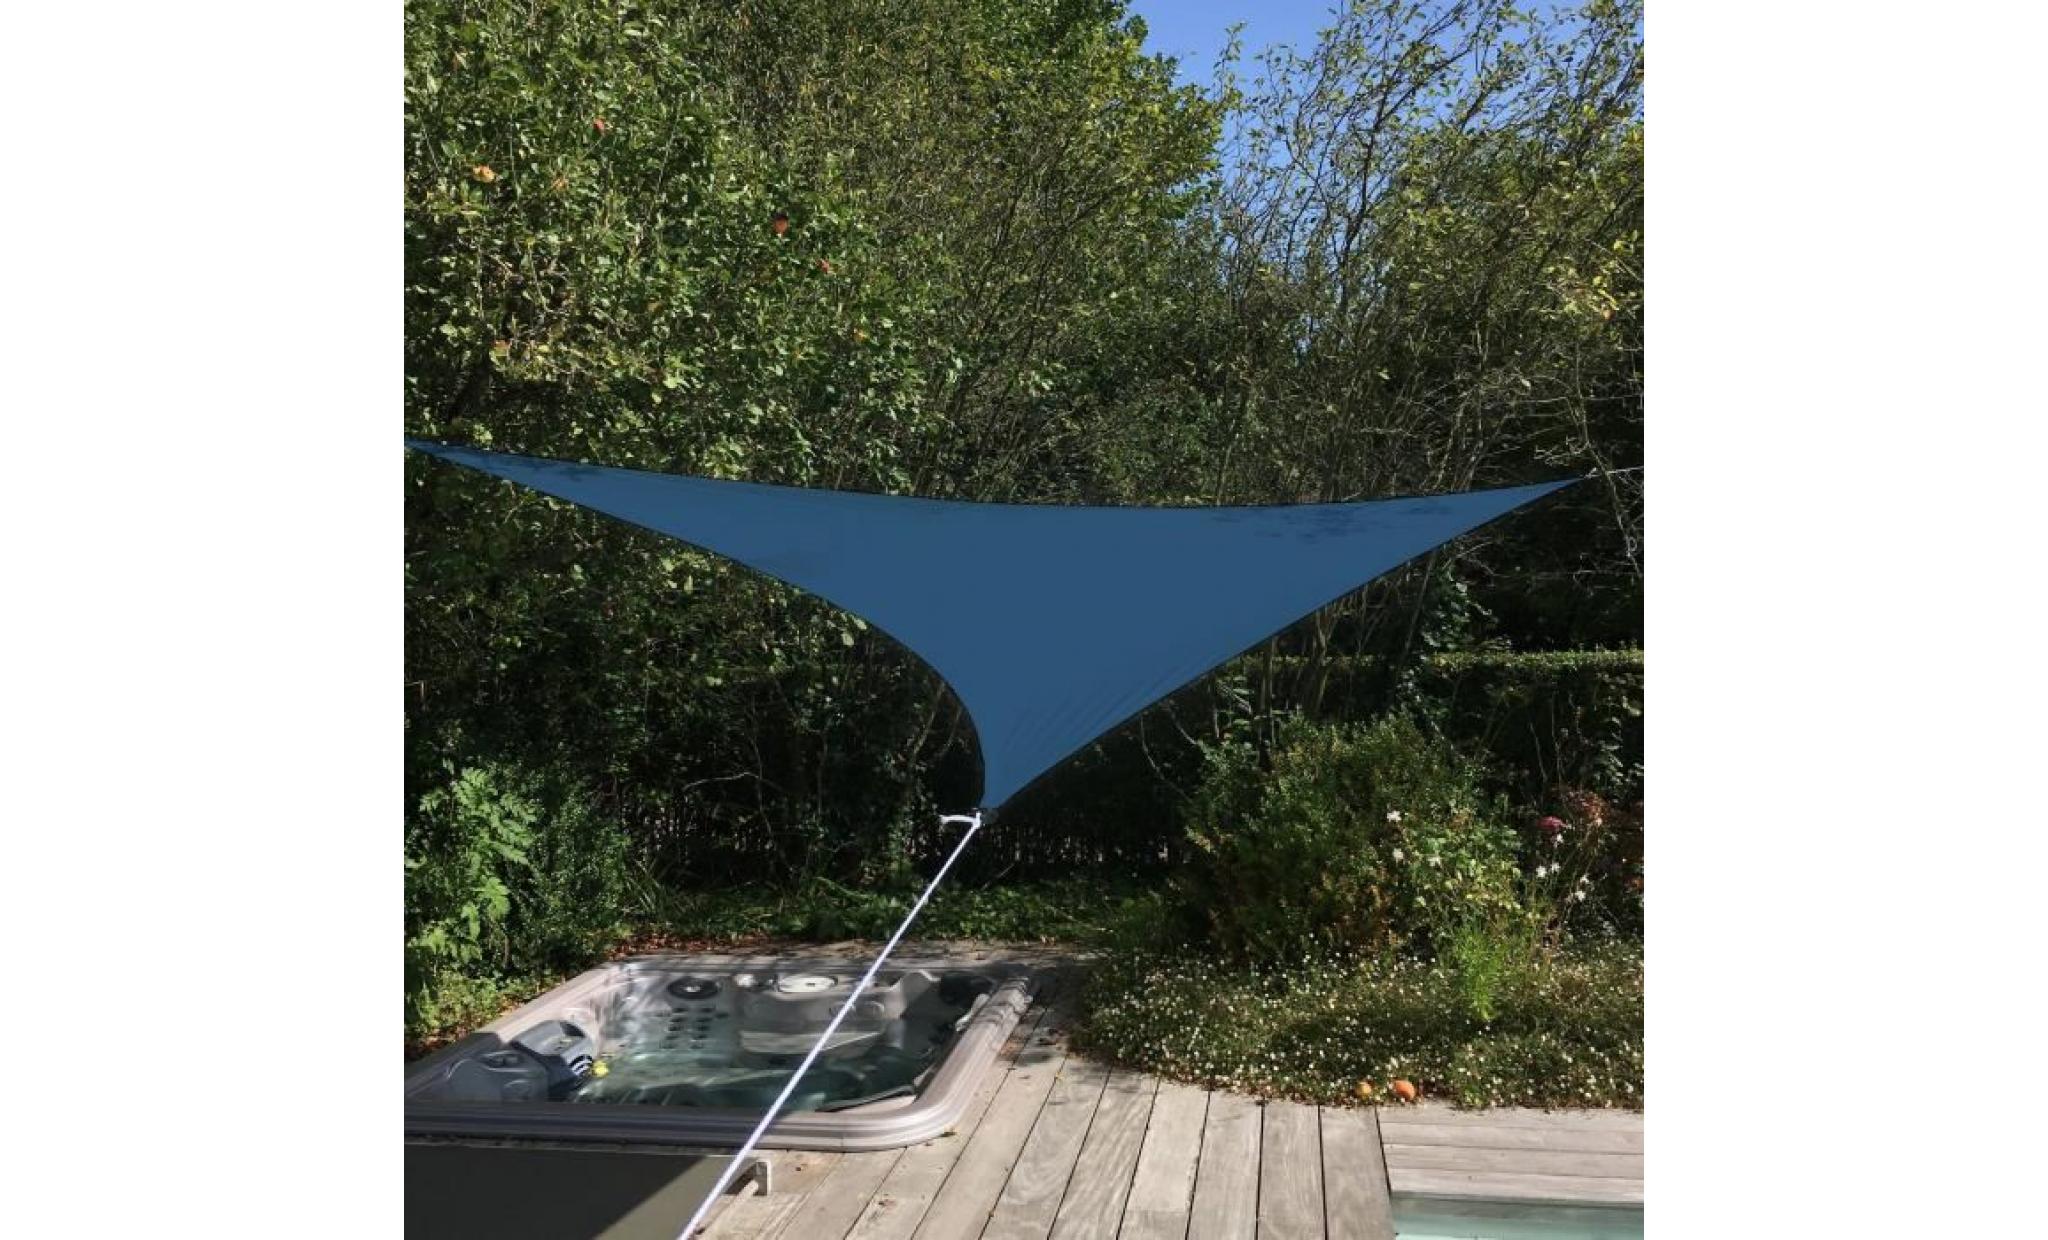 voile d’ombrage triangulaire extensible easywind 3,6 x 3,6 x 3,6m   bleu   anti uv upf 50+